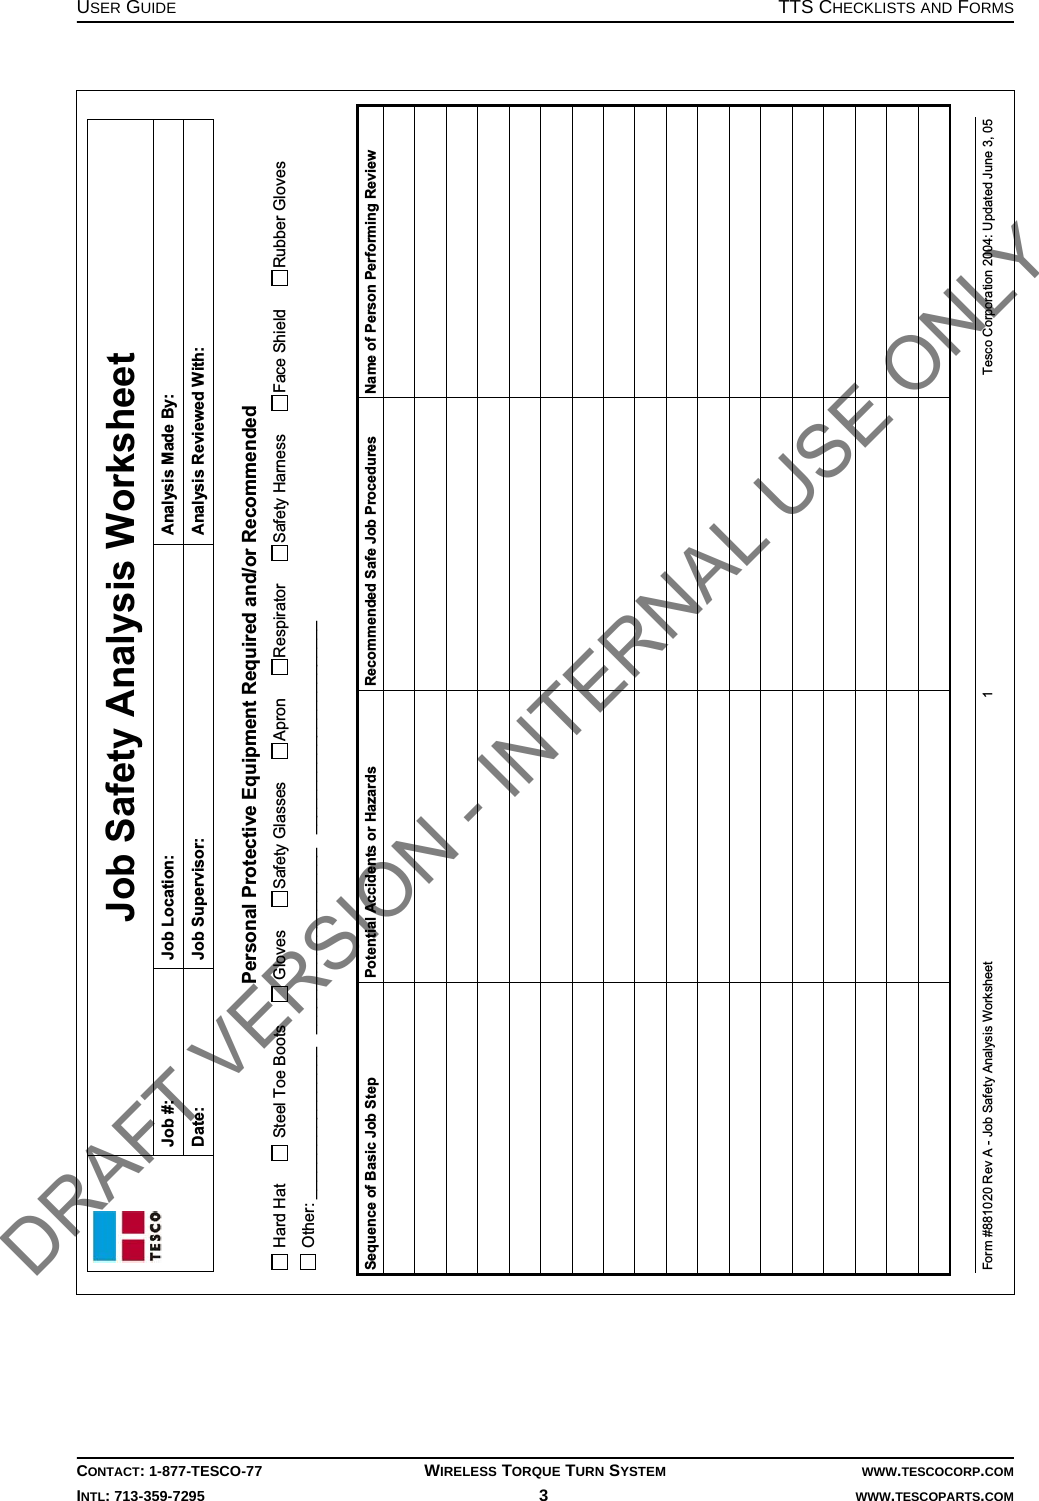 USER GUIDE TTS CHECKLISTS AND FORMSCONTACT: 1-877-TESCO-77 WIRELESS TORQUE TURN SYSTEM WWW.TESCOCORP.COMINTL: 713-359-7295 3   WWW.TESCOPARTS.COMJob Safety Analysis Worksheet Job #:  Job Location:  Analysis Made By:  Date:  Job Supervisor:  Analysis Reviewed With:  Form #881020 Rev A - Job Safety Analysis Worksheet  1  Tesco Corporation 2004: Updated June 3, 05  Personal Protective Equipment Required and/or Recommended  Hard Hat       Steel Toe Boots       Gloves      Safety Glasses      Apron      Respirator      Safety Harness      Face Shield      Rubber Gloves  Other: _________________   _____________________   ________________________  Sequence of Basic Job Step  Potential Accidents or Hazards  Recommended Safe Job Procedures  Name of Person Performing Review                                                                          DRAFT VERSION - INTERNAL USE ONLY